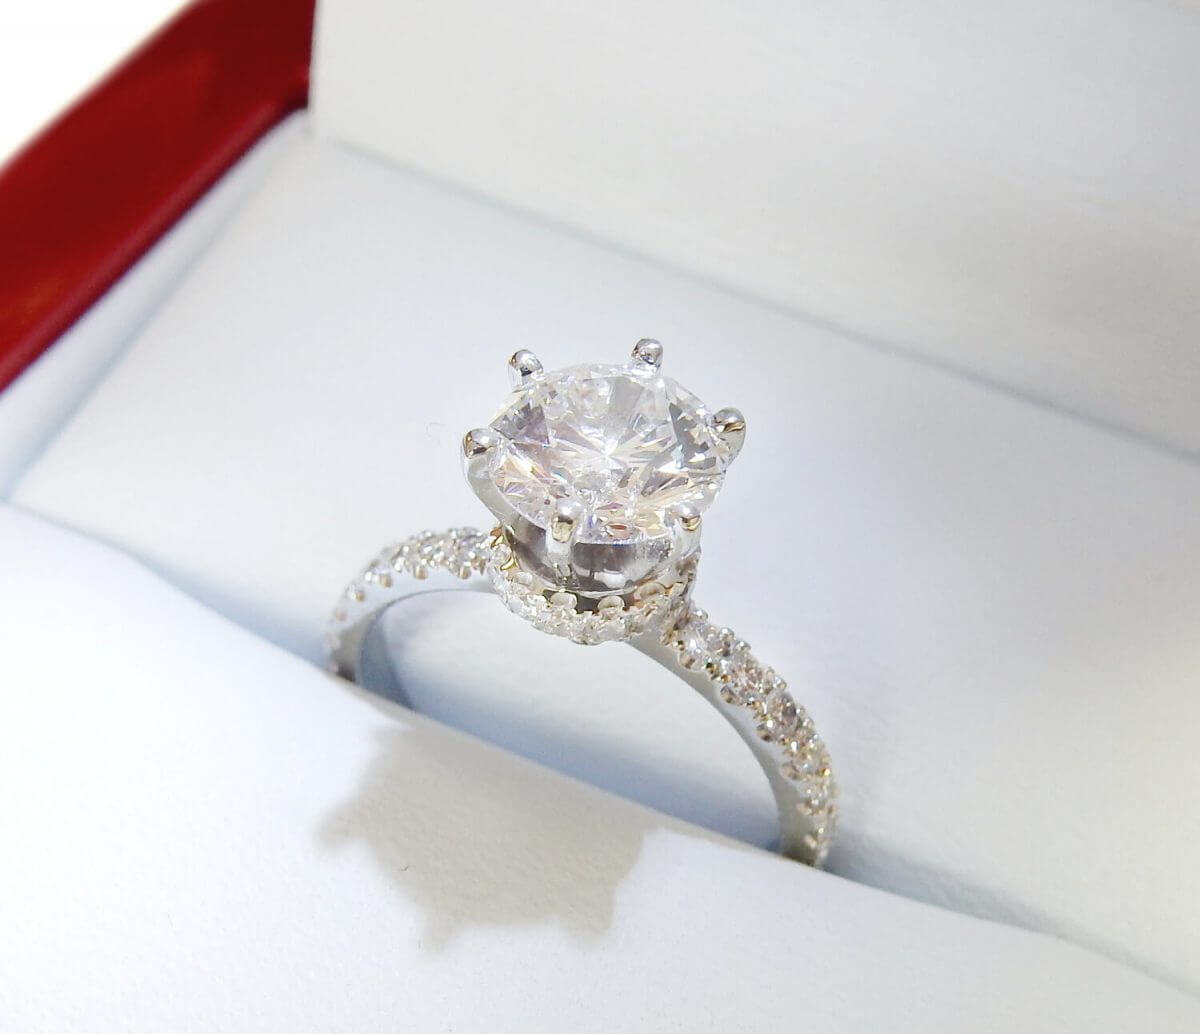 Six prong engagement ring with diamond collar